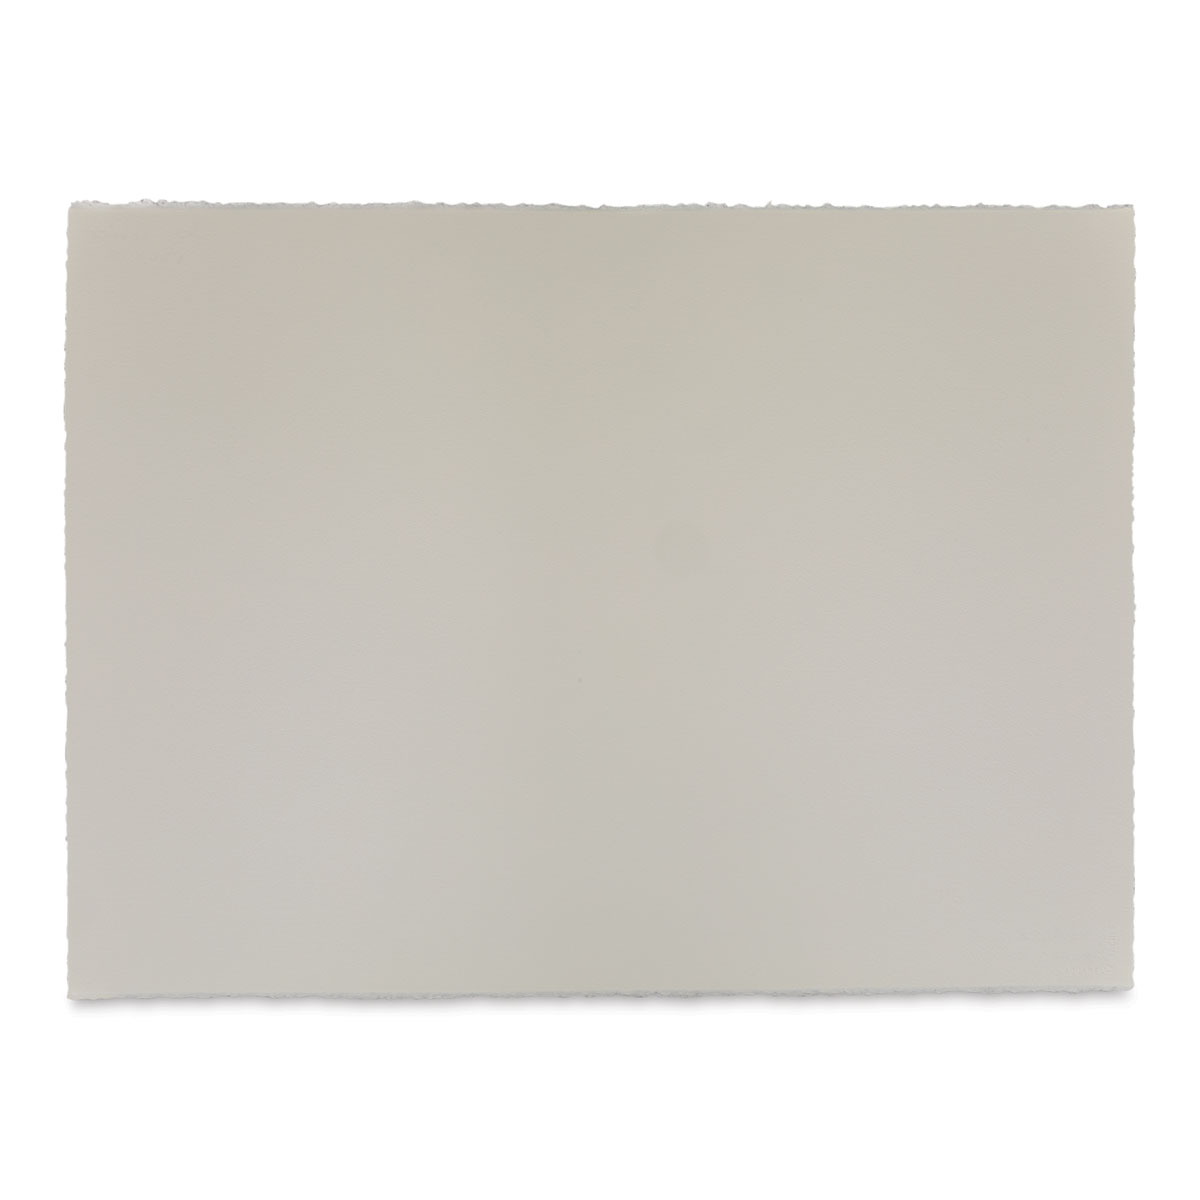 Arches 22 x 30 140 Lb./300g Cold Press Watercolor Sheets, Bright White, UPC Labeled 10-Pack